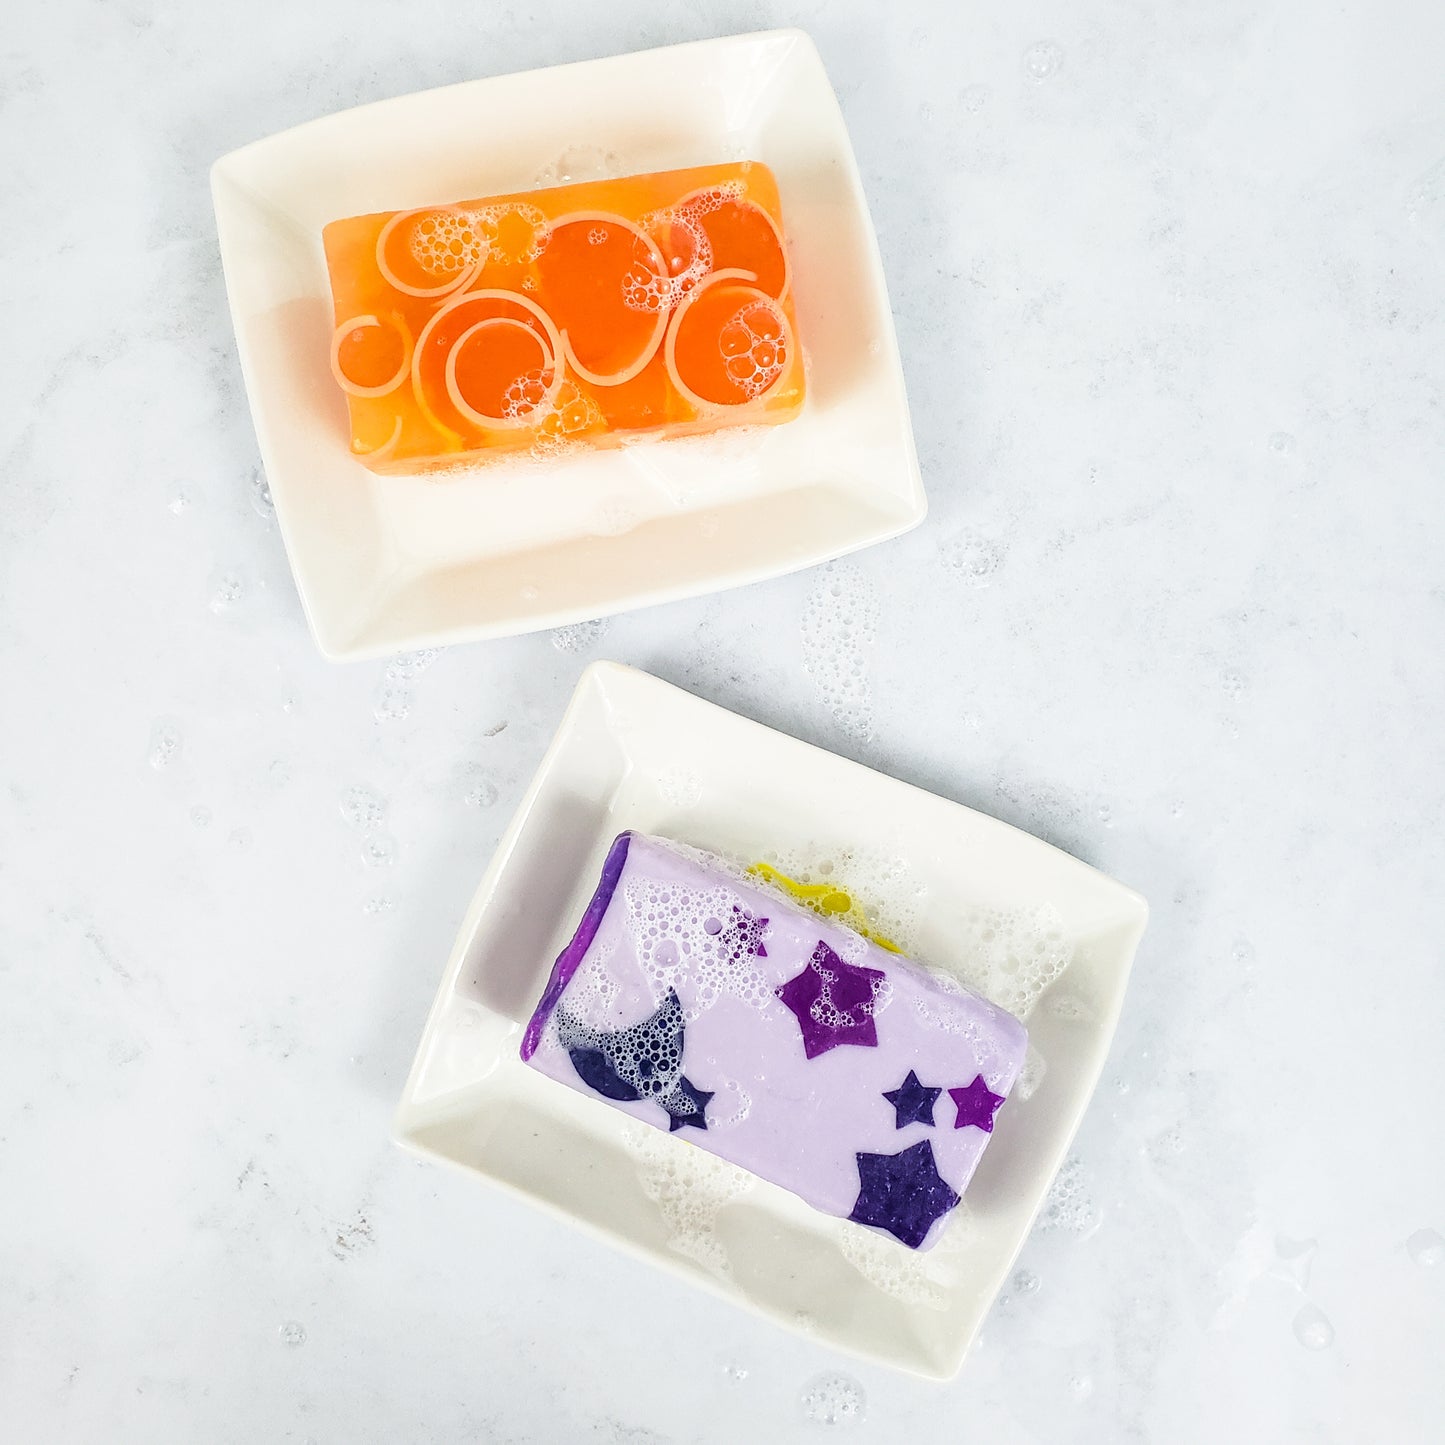 Two white rectangular soap dishes on a white background. One has an orange soap on top, one has a purple soap with stars on it.